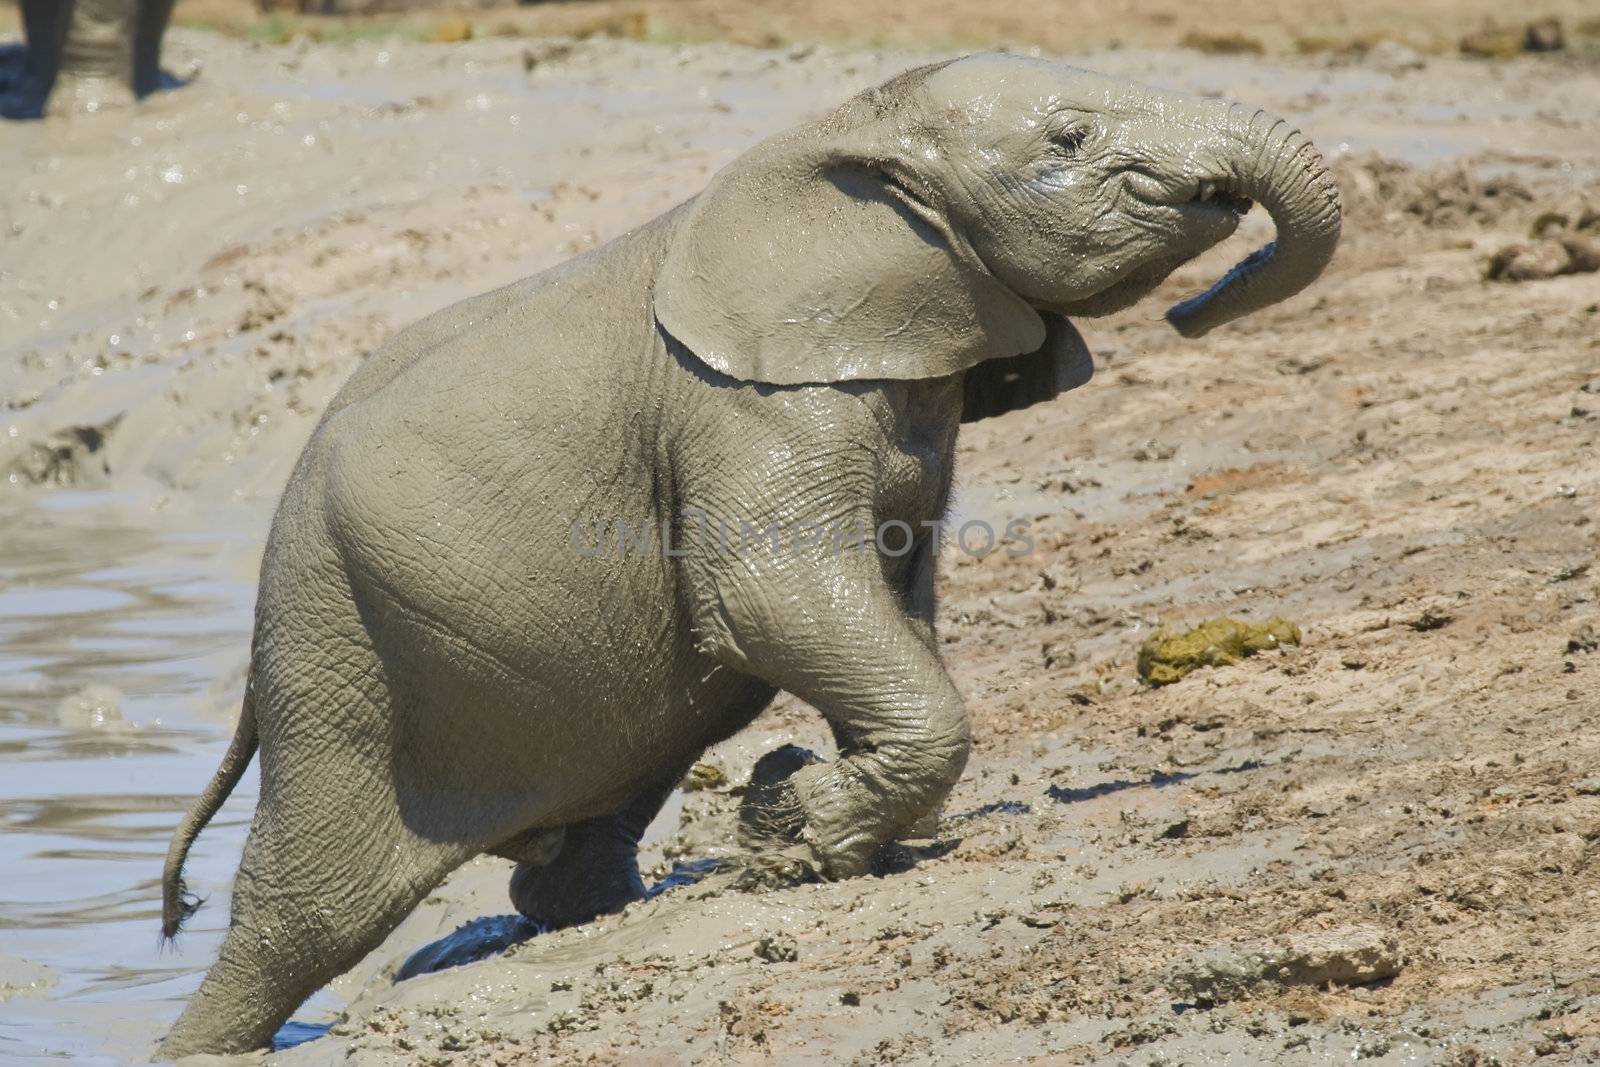 Baby elephant trying to climb out of the mud pit